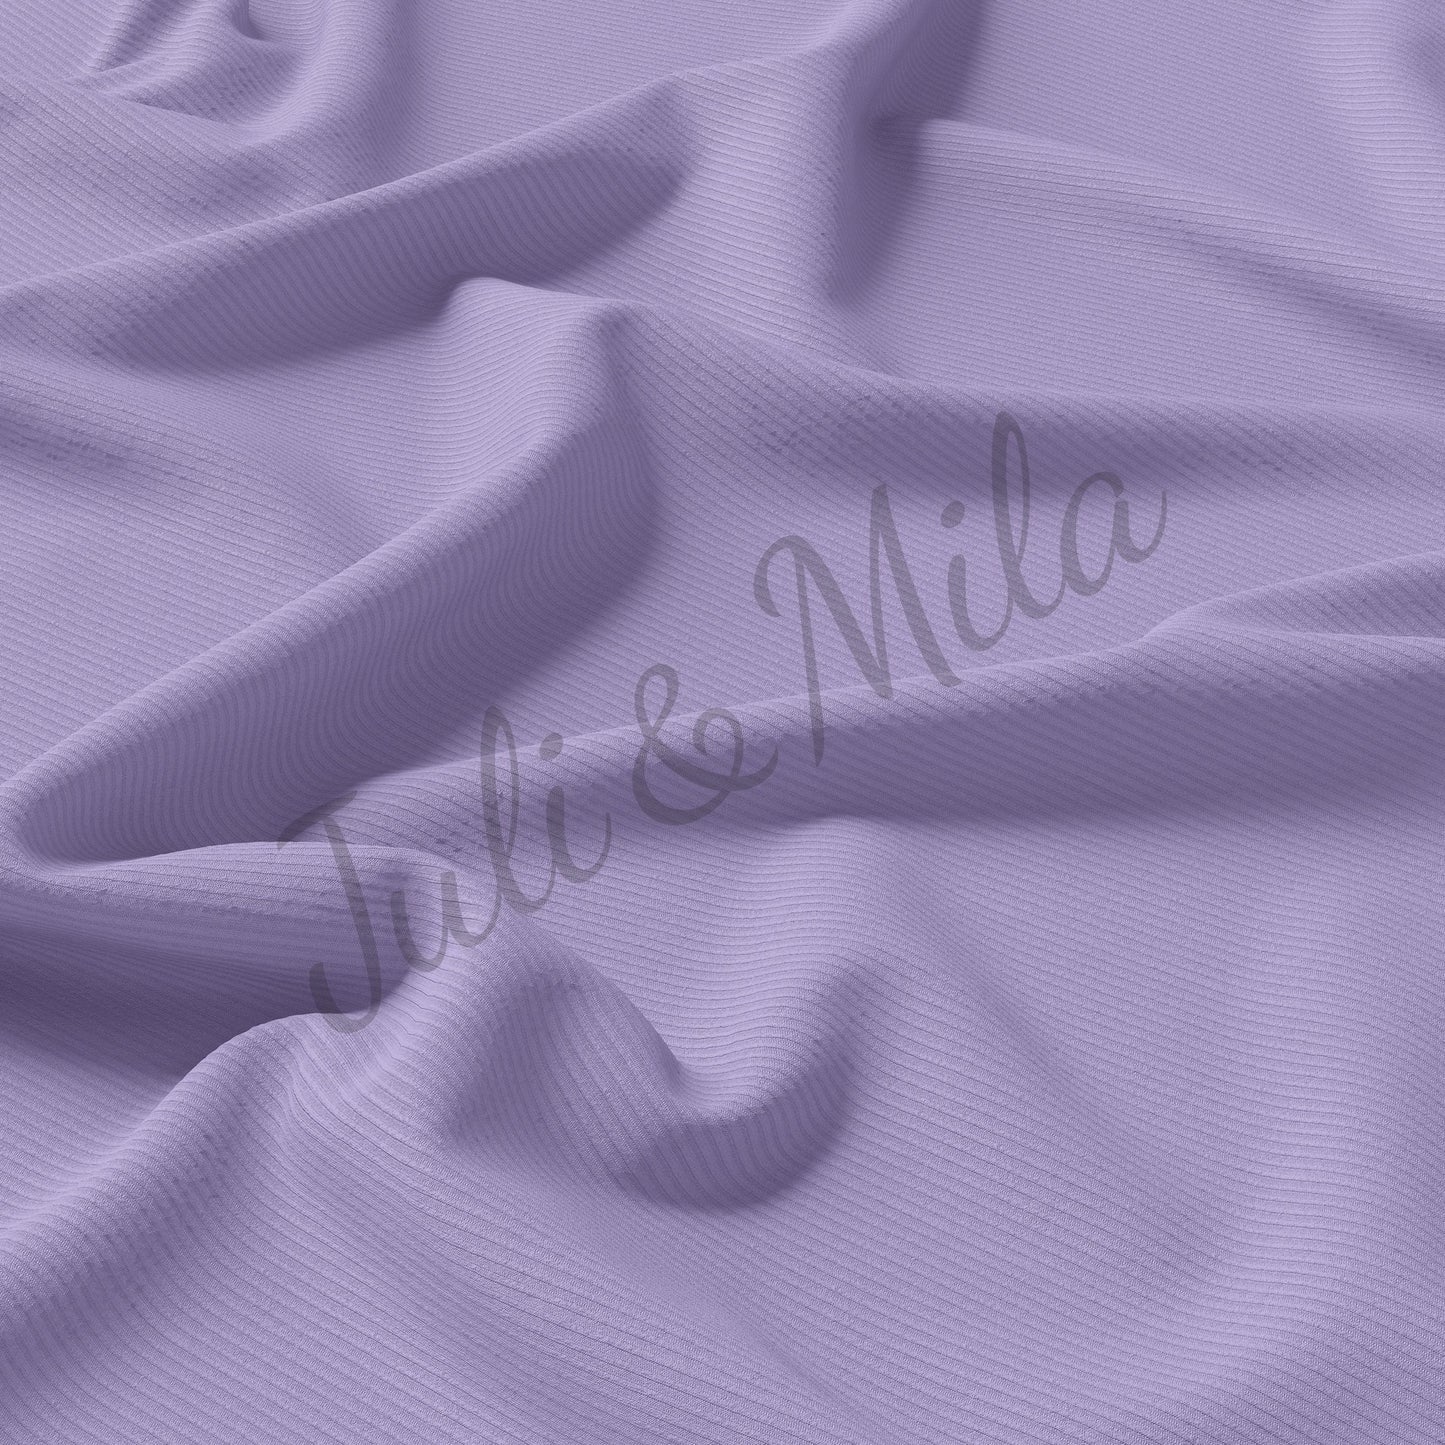 Lavender Rib Knit Fabric by the Yard Ribbed Jersey Stretchy Soft Polyester Stretch Fabric 1 Yard